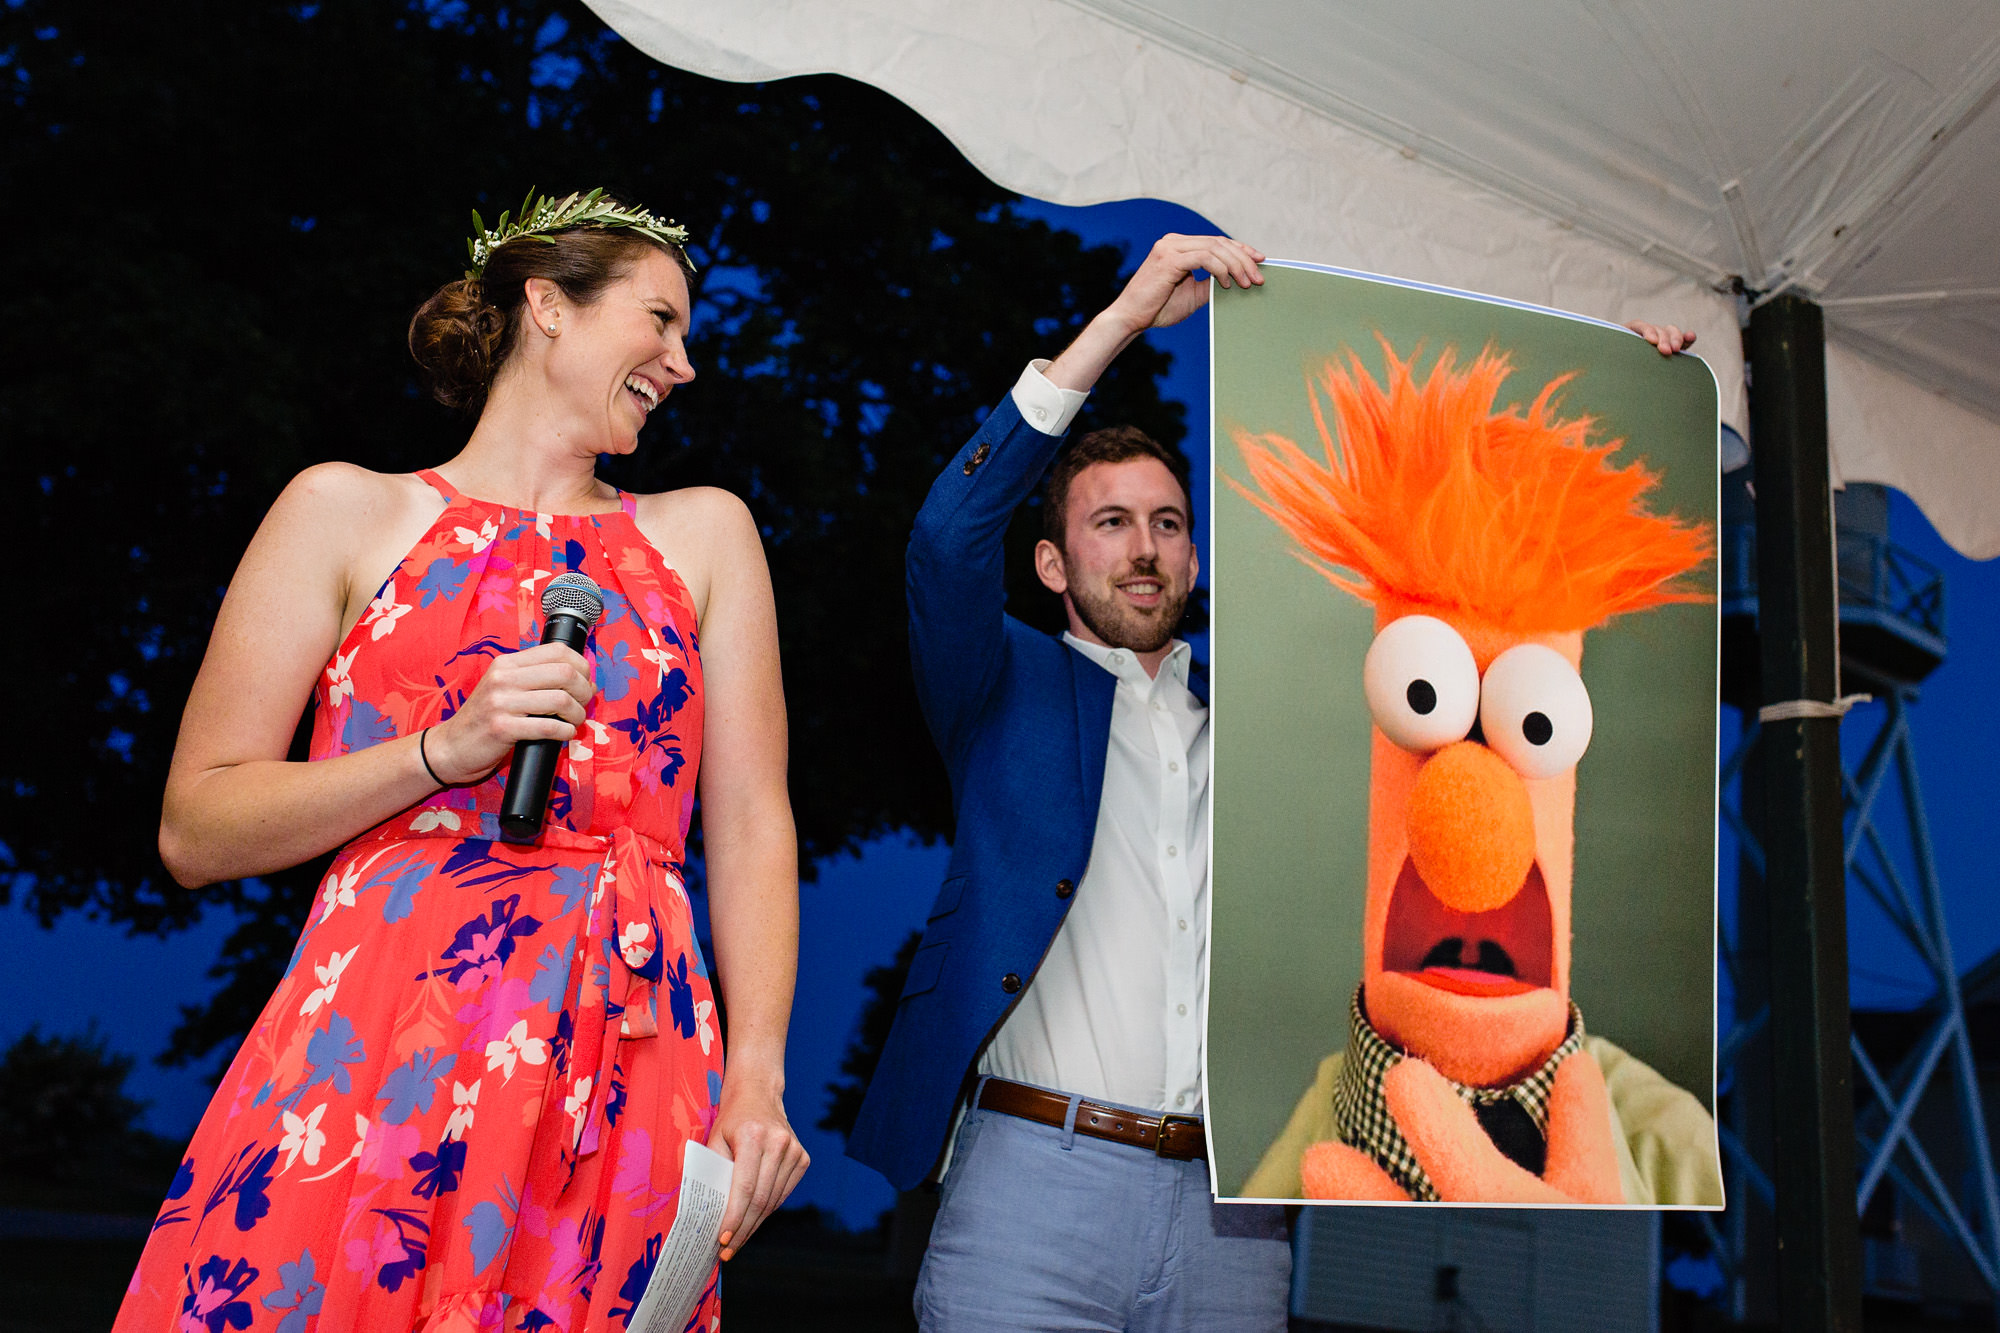 A funny toast takes place at a wedding at Laudholm Farm in Maine